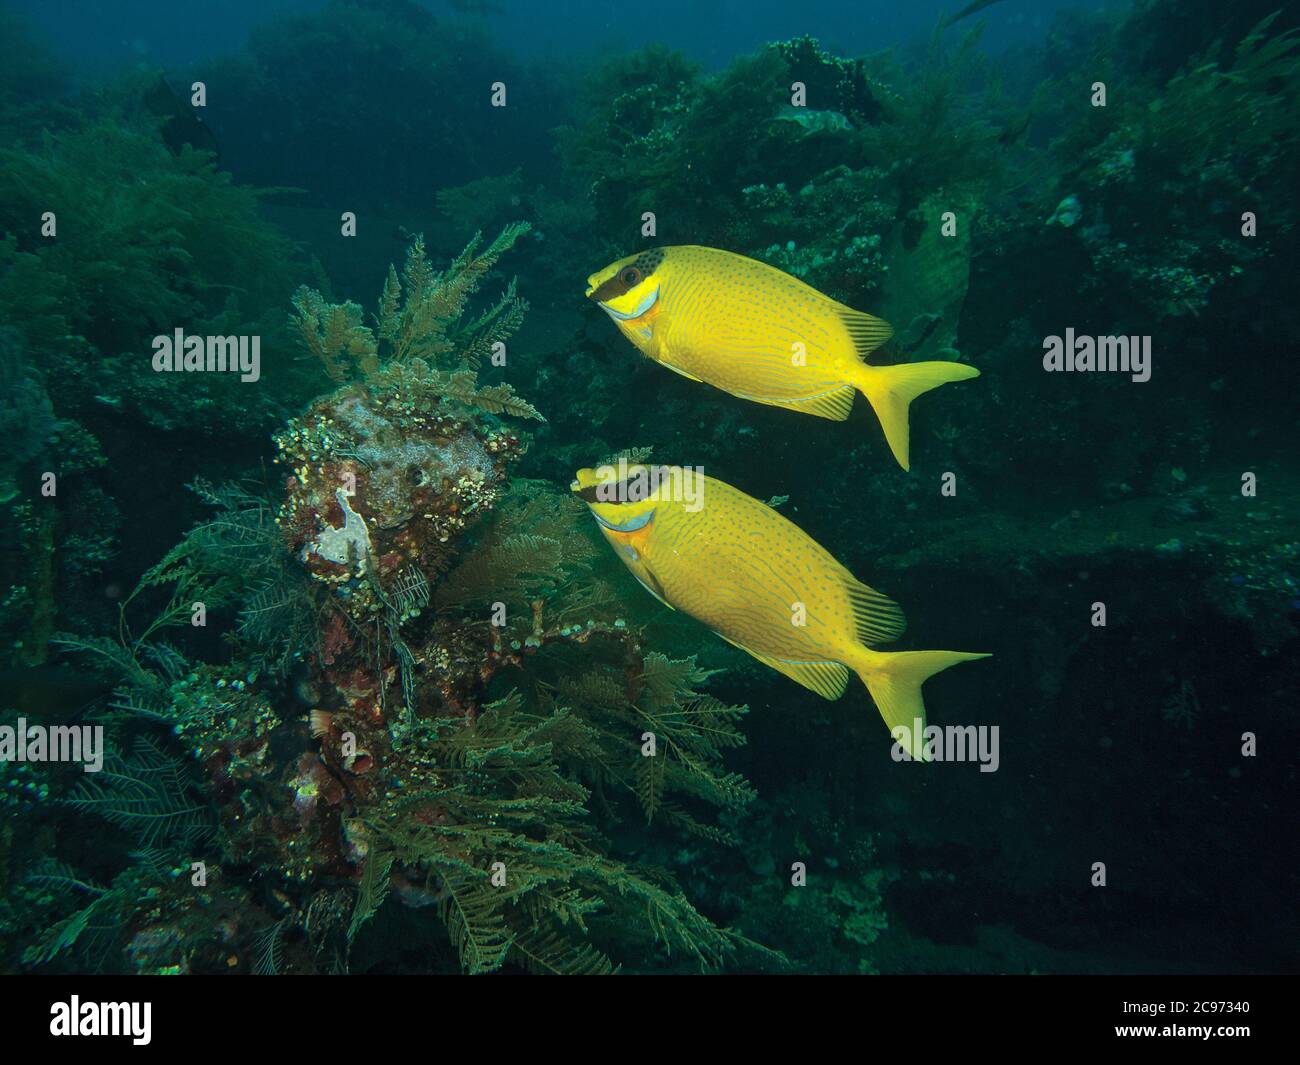 Two Masked rabbitfish, Siganus puellus, on coral reef in Tulamben, Bali, Indonesia Stock Photo